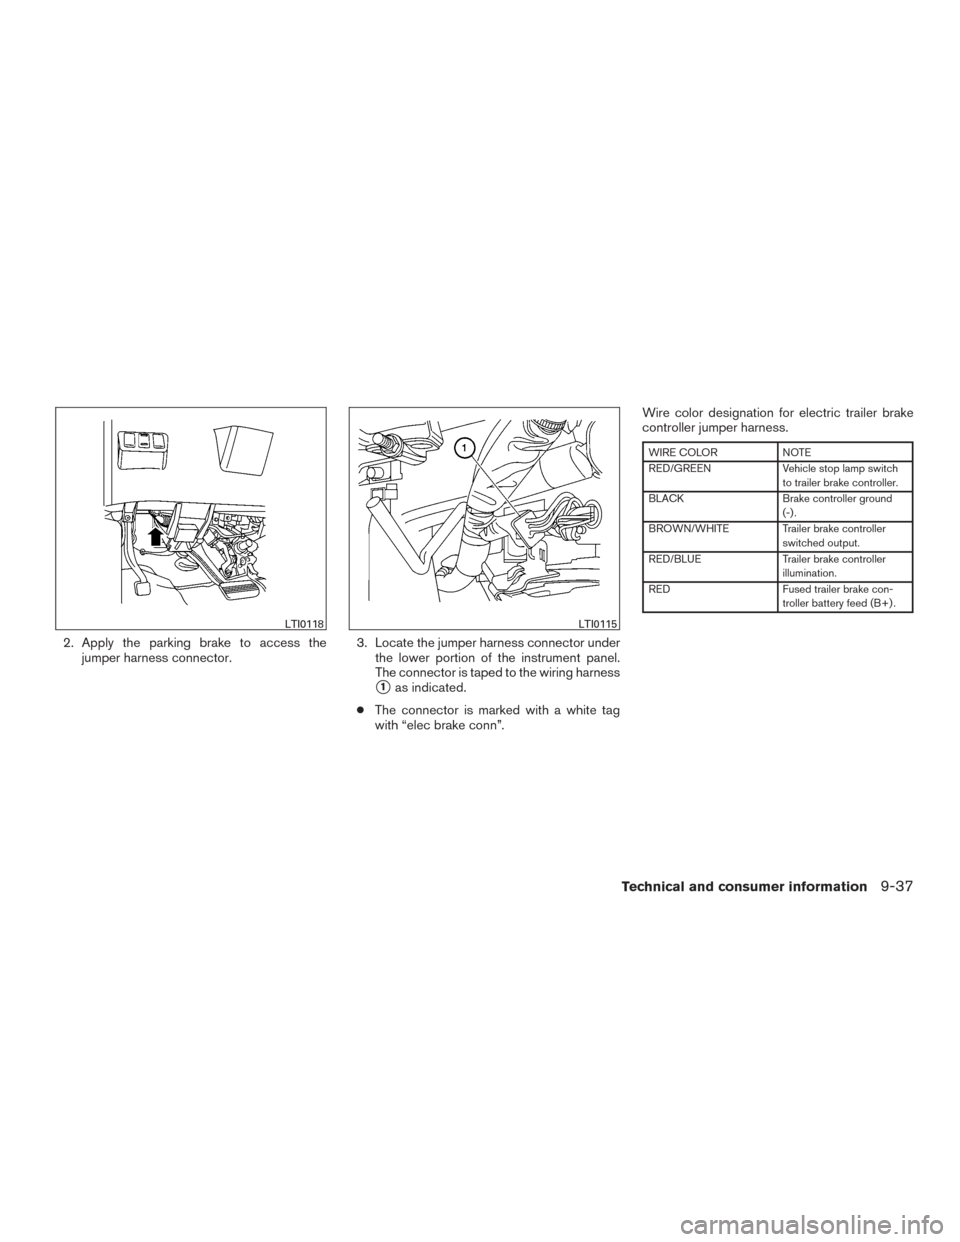 NISSAN TITAN 2015 1.G Owners Manual 2. Apply the parking brake to access thejumper harness connector. 3. Locate the jumper harness connector under
the lower portion of the instrument panel.
The connector is taped to the wiring harness
